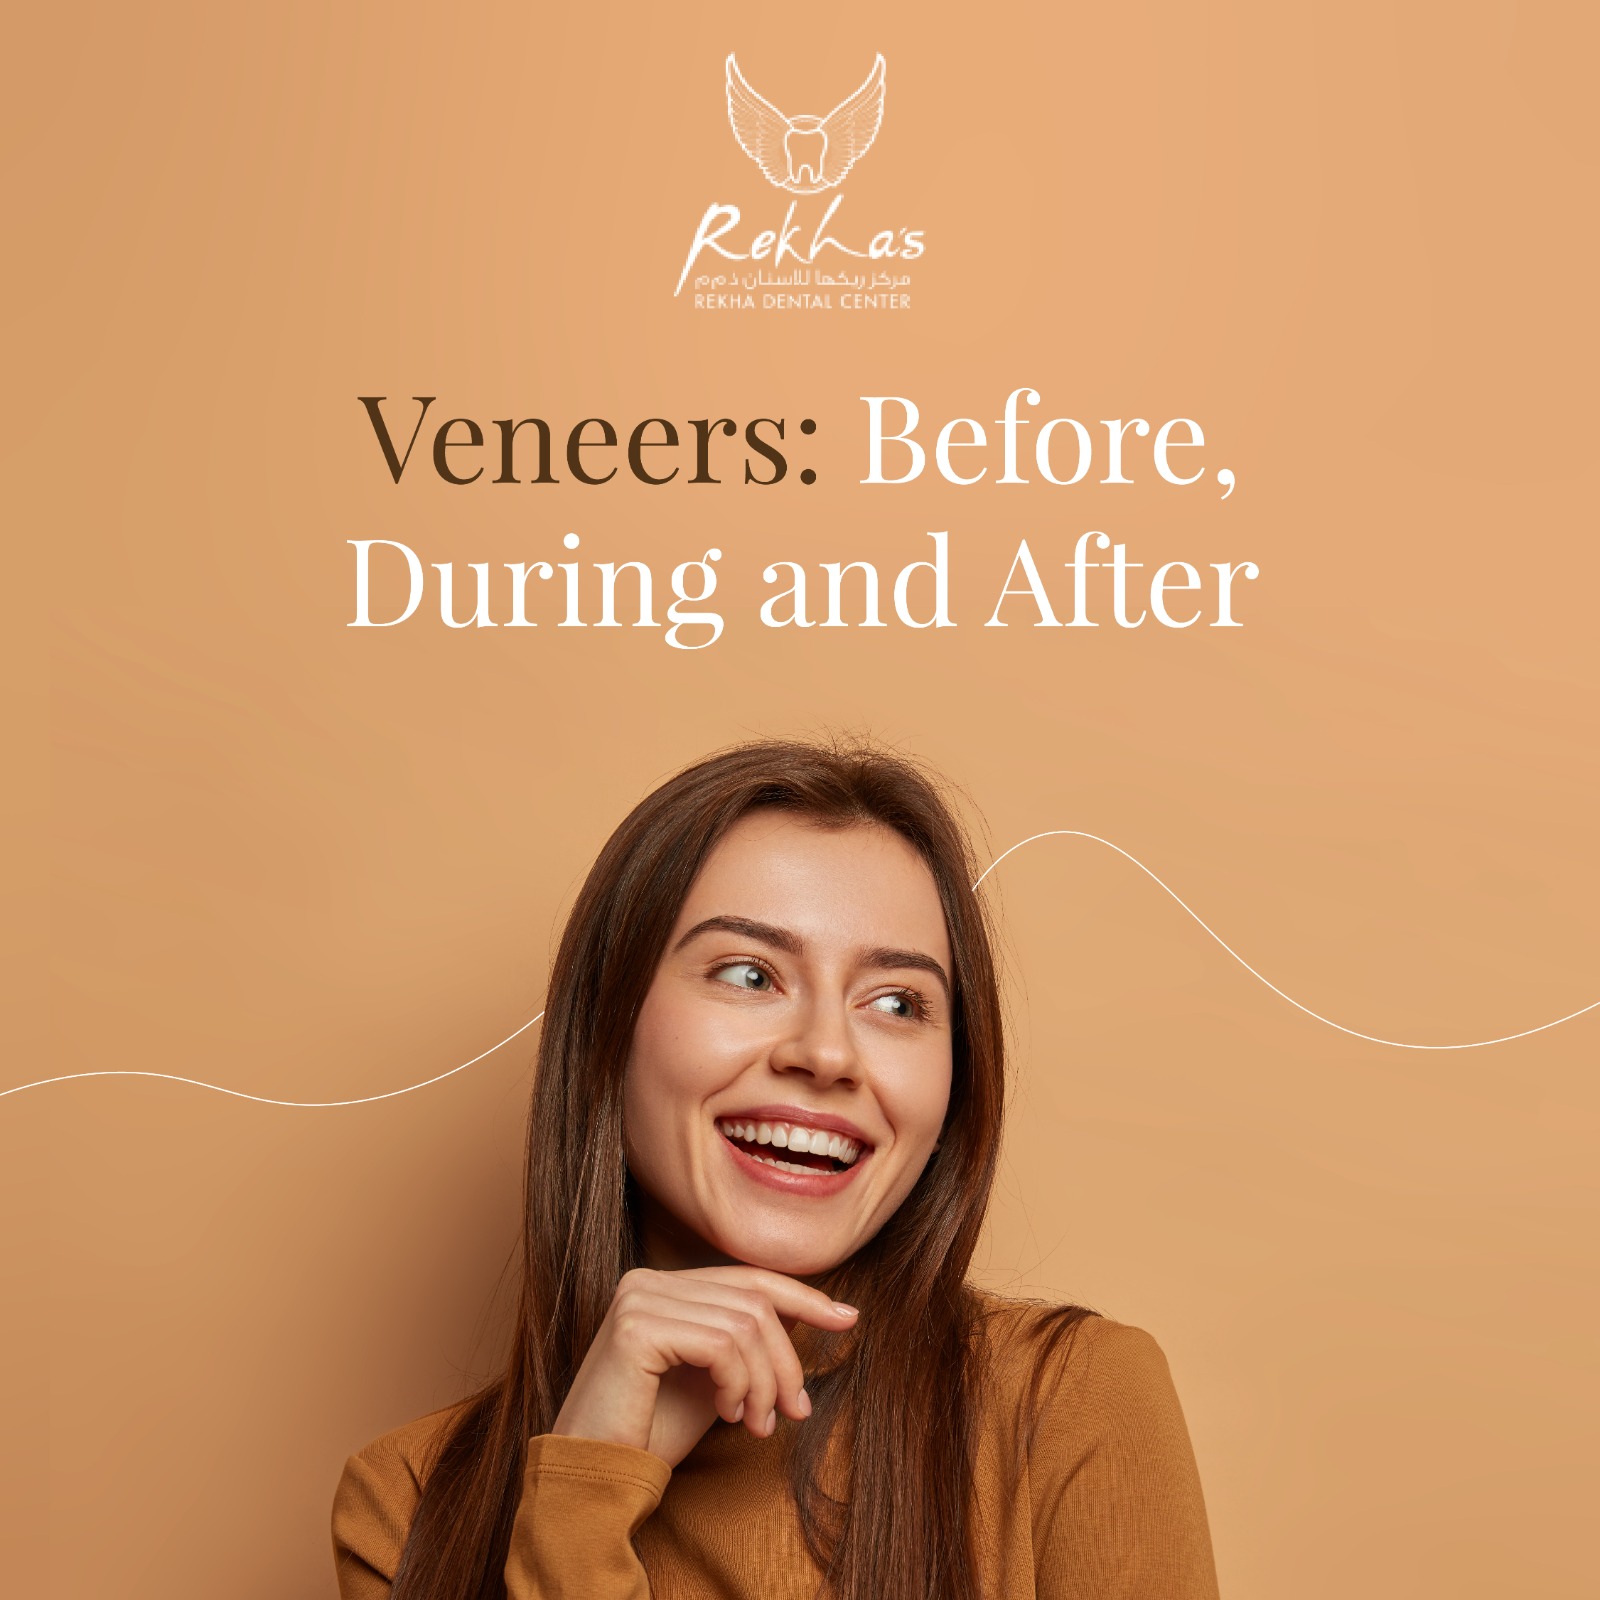 Veneers: Before, During, and After